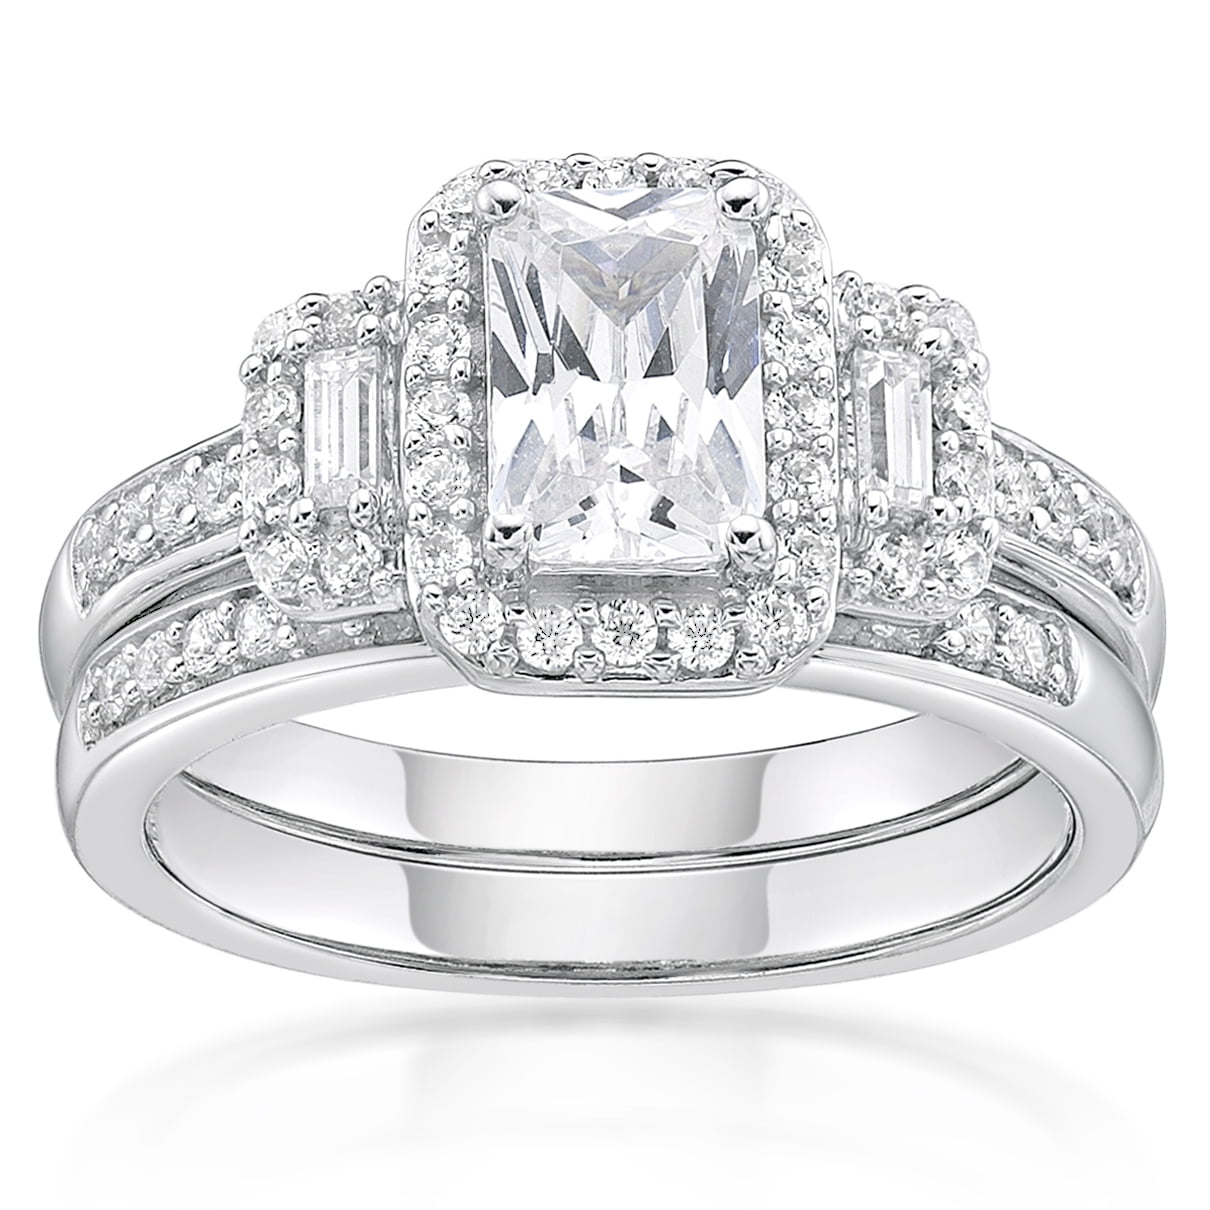 Huge 32ct White Emerald Cut Diamond 925 Sterling Silver Engagement Cocktail Ring 